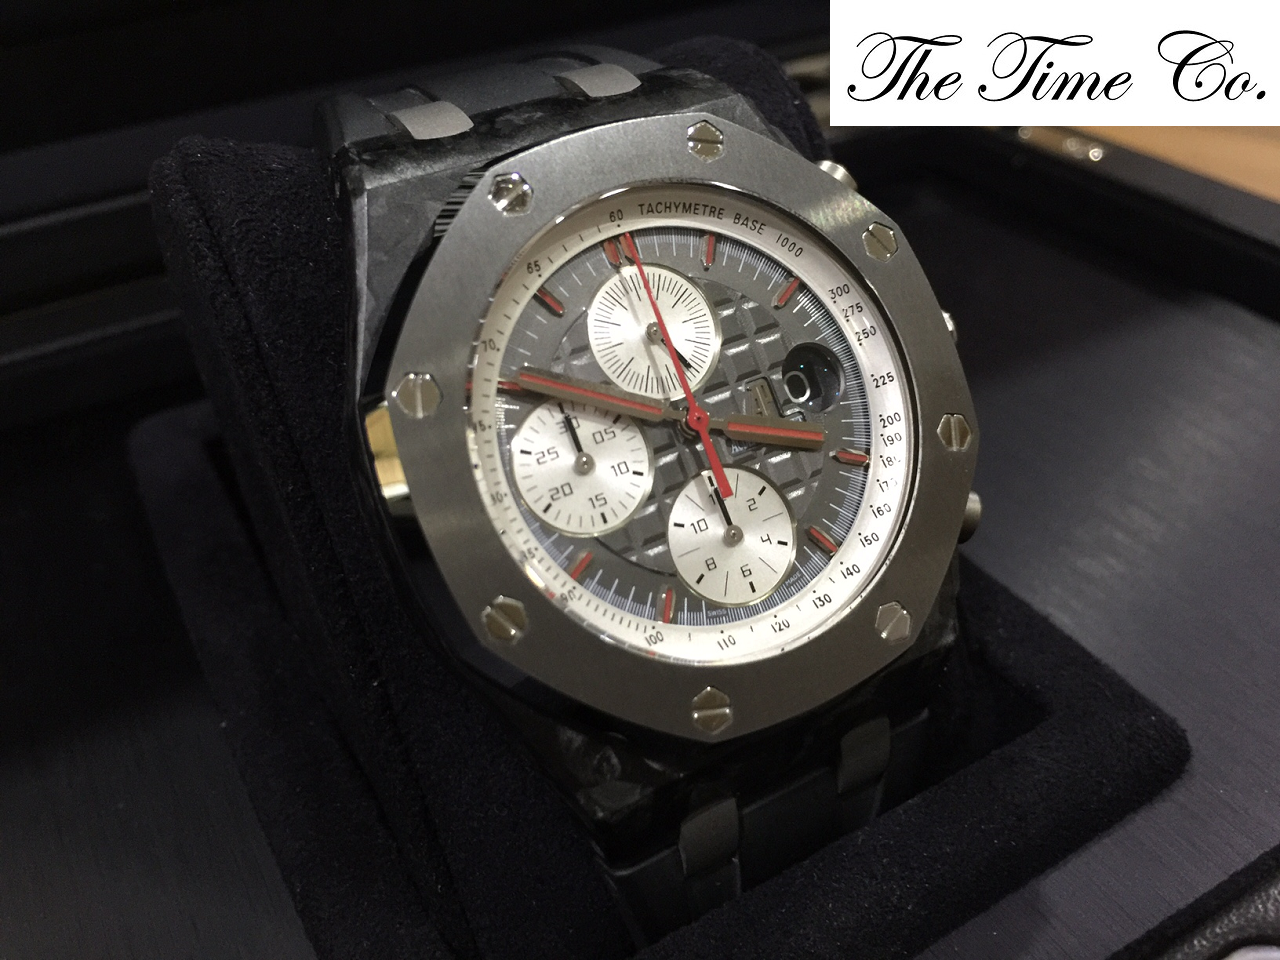 -SOLD- Audemars Piguet ROO Jarno Trulli Limited 500 Pieces